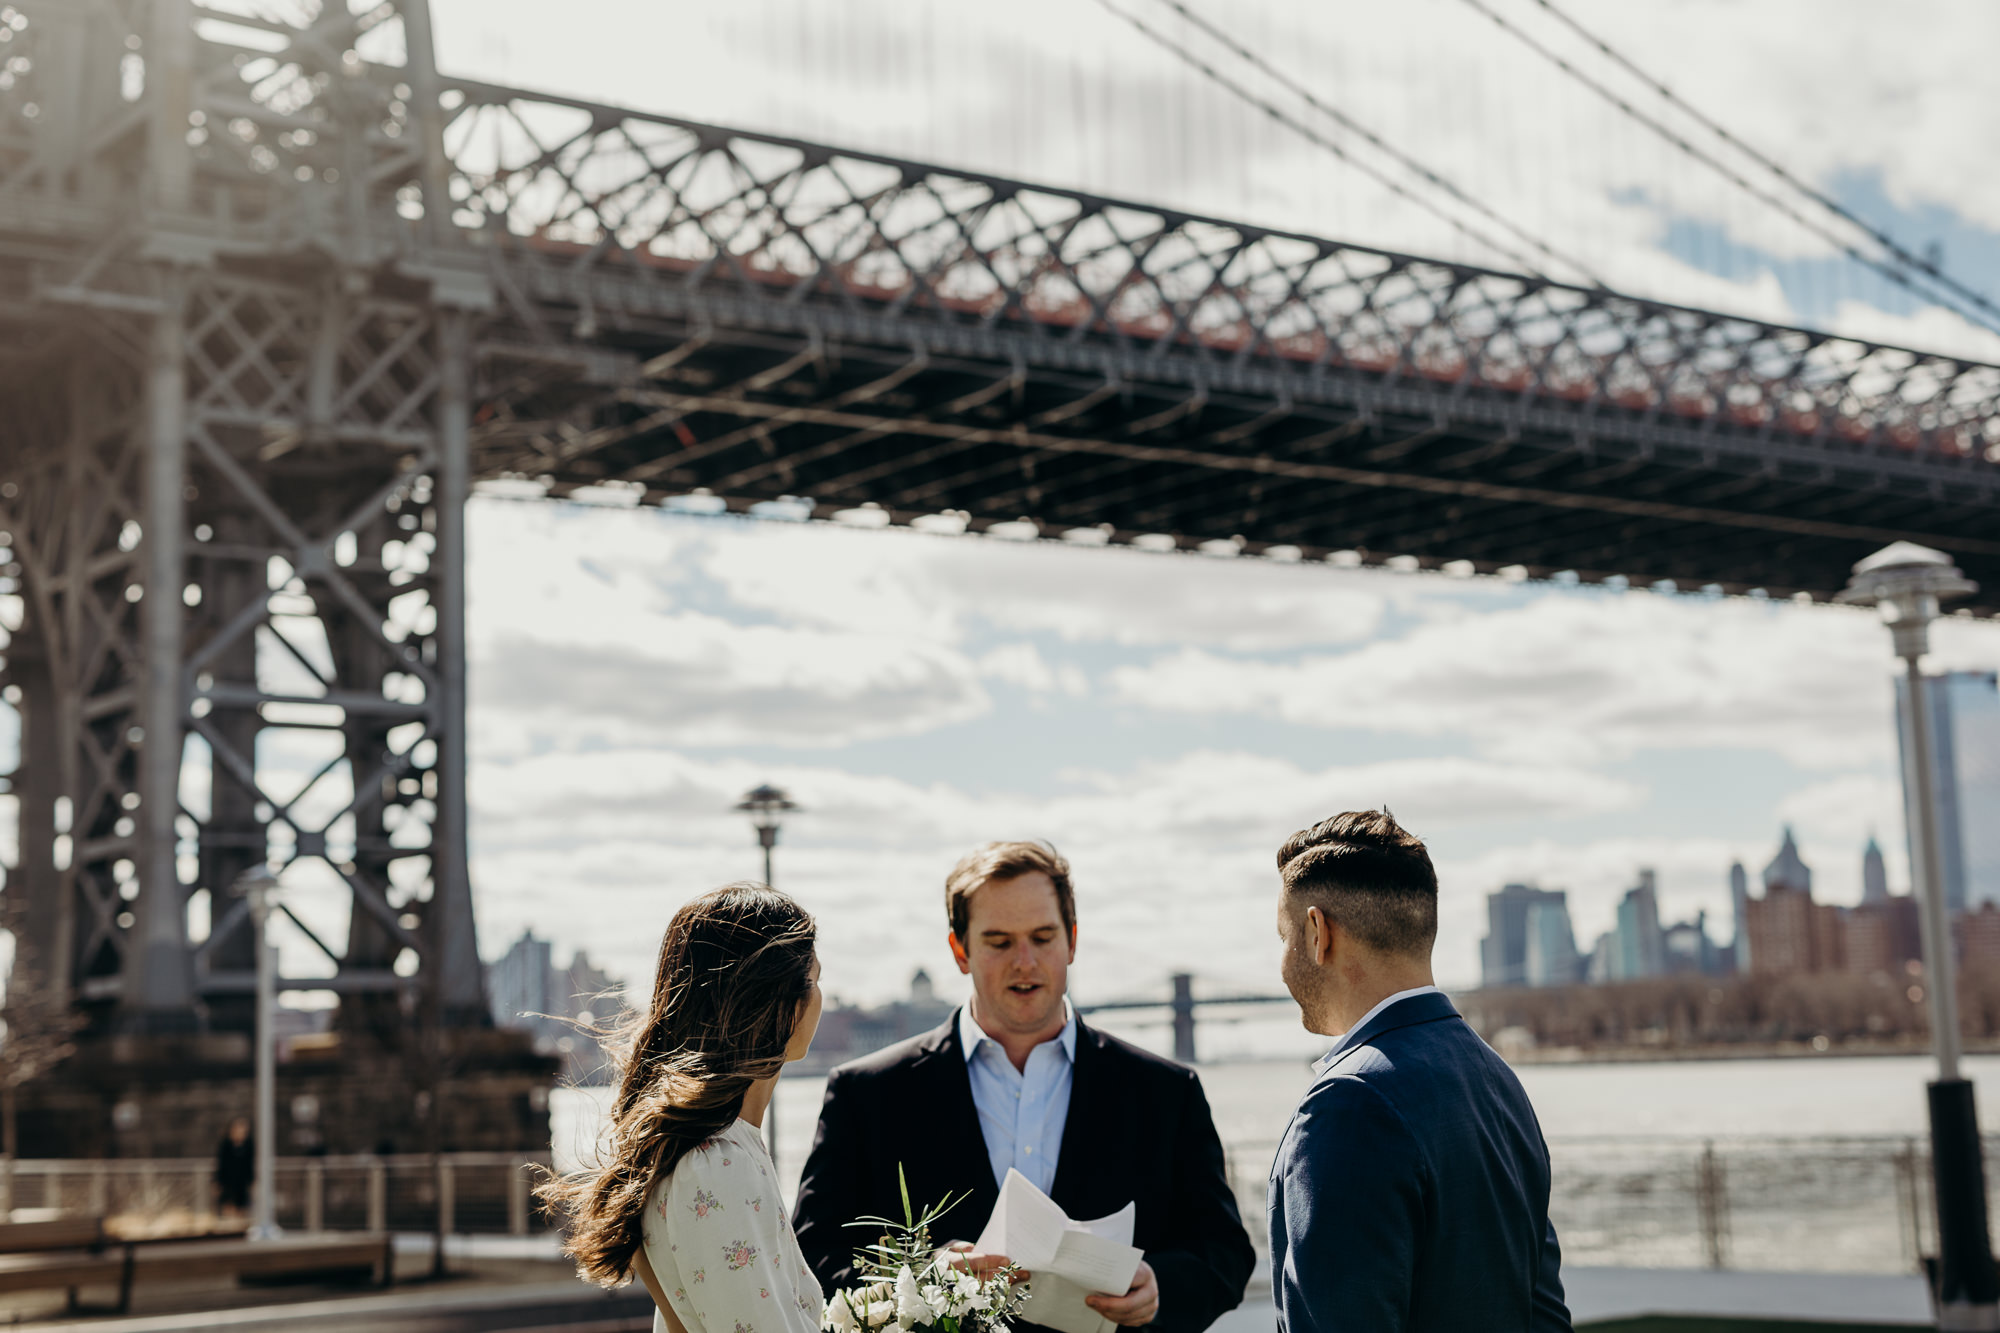 bride and groom during their wedding ceremony at domino park in brooklyn, ny